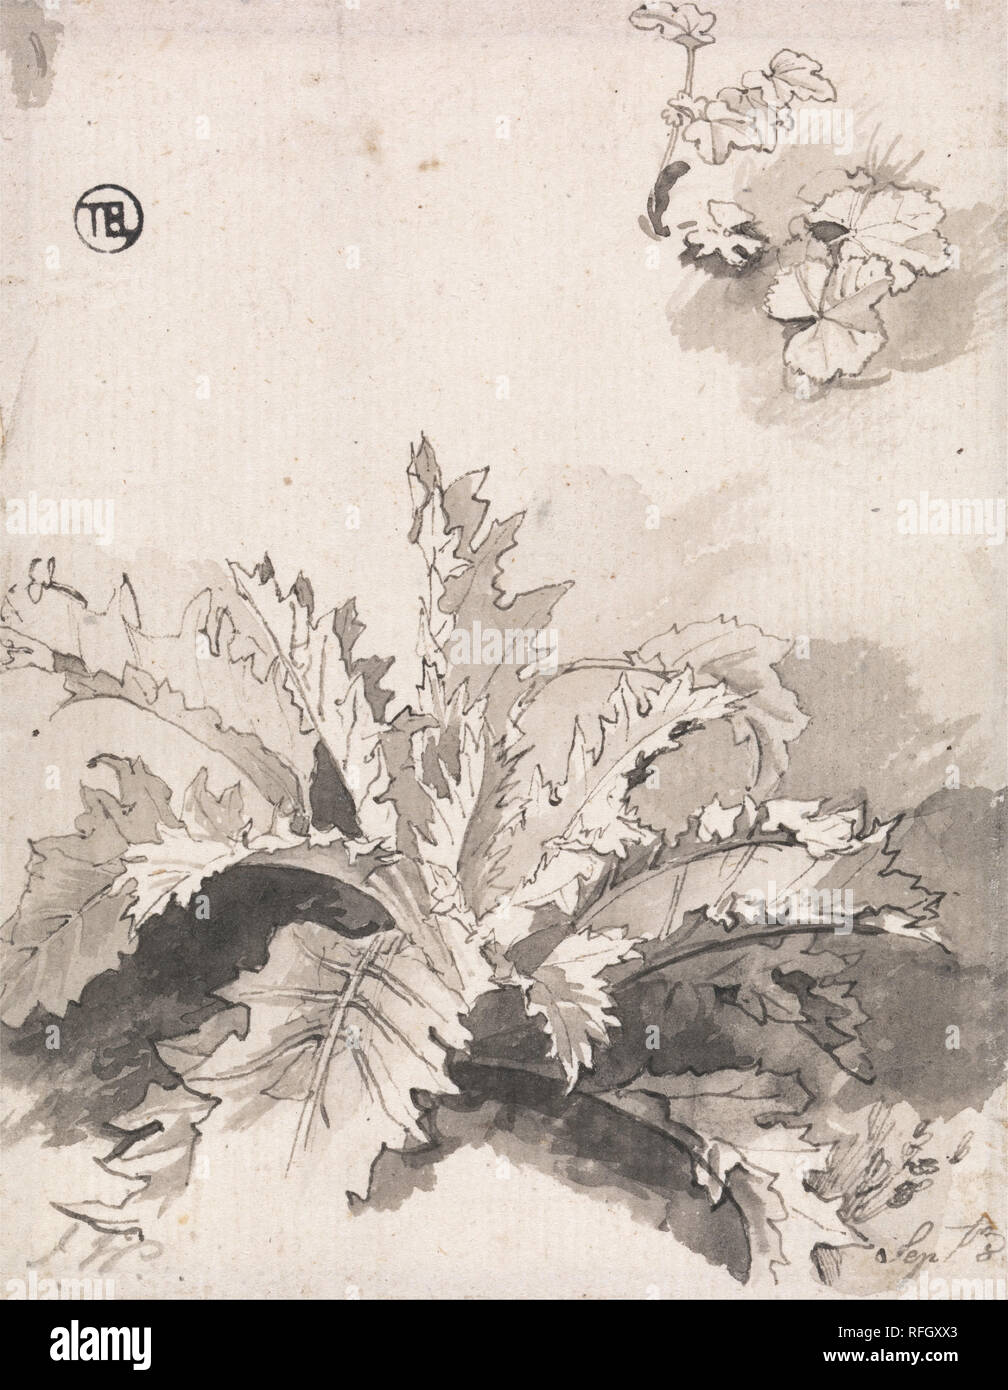 Study of a Thistle and Other Plants, Sept. 8. Date/Period: Early 19th century. Drawing. Black ink and gray wash on medium, slightly textured, cream laid paper. Height: 111 mm (4.37 in); Width: 89 mm (3.50 in). Author: UNKNOWN ARTIST. Stock Photo